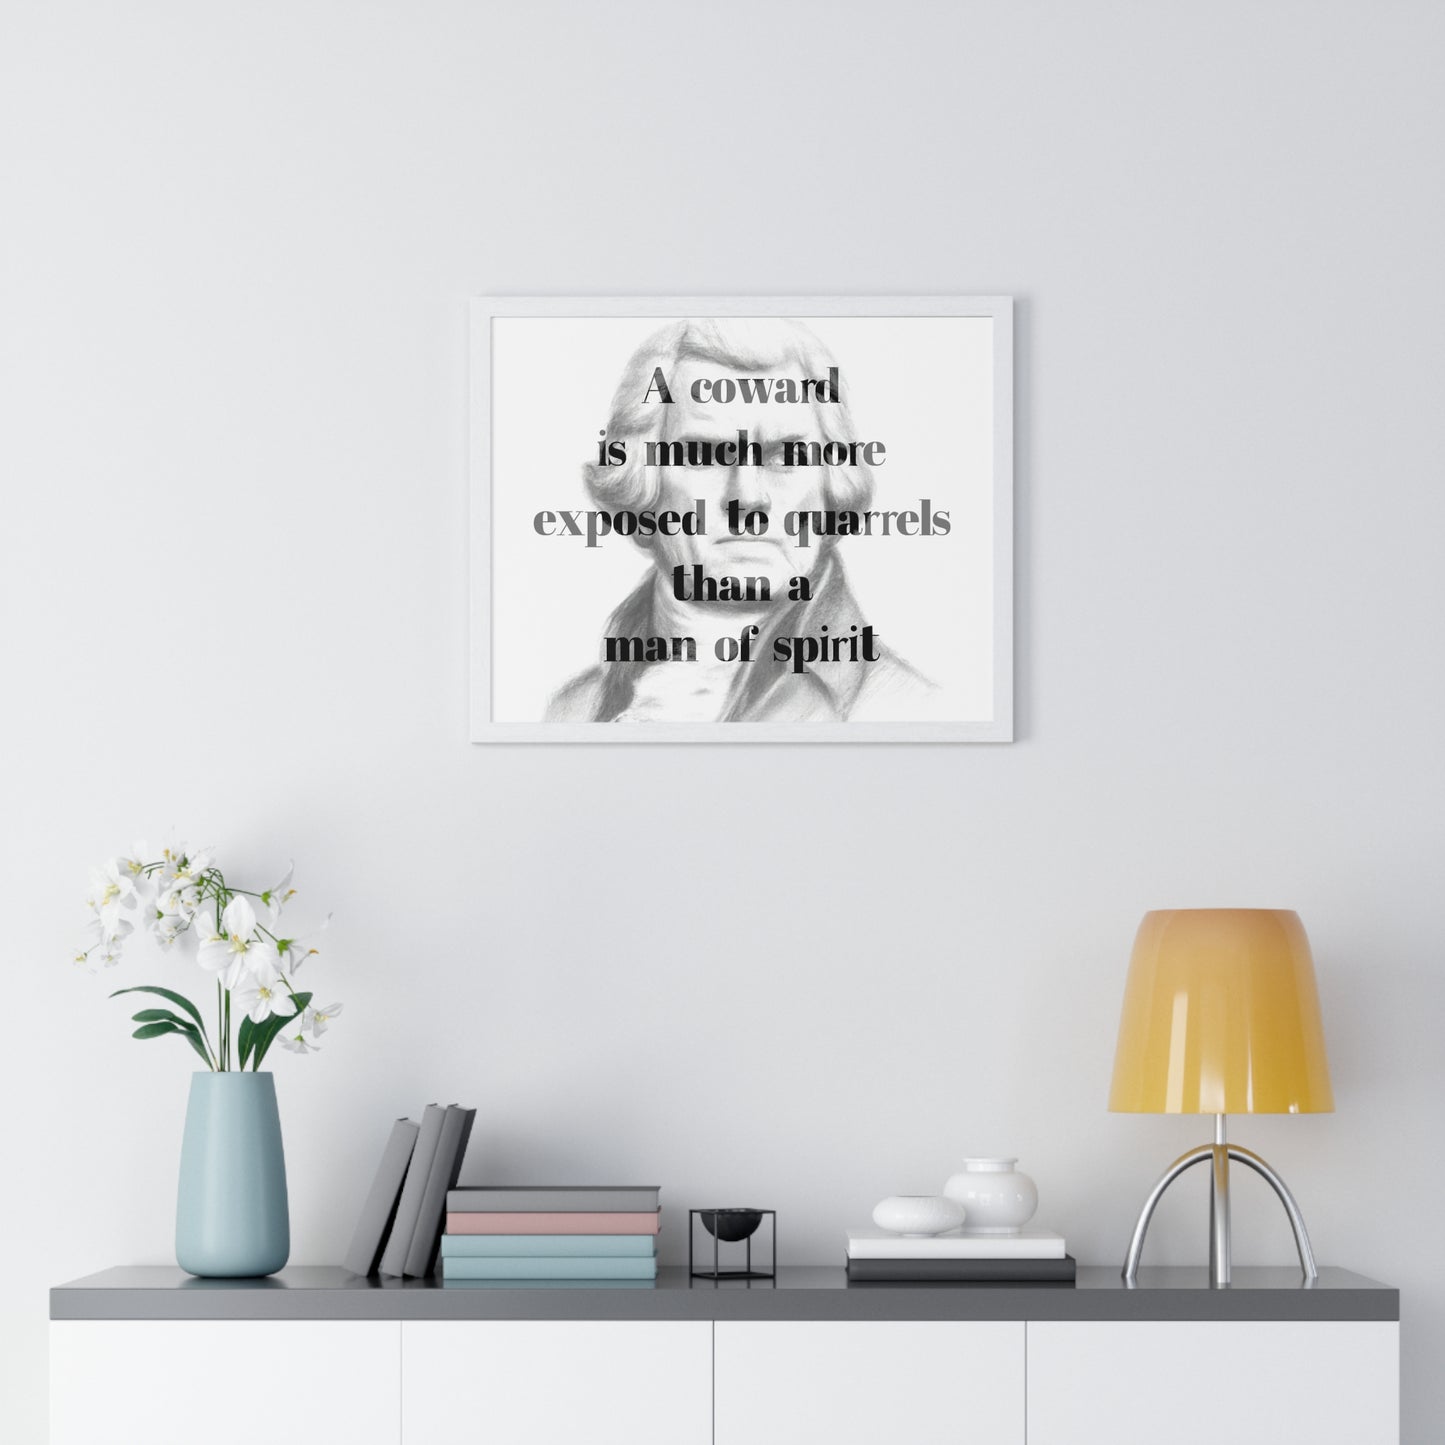 Thomas Jefferson Quote 6, Poster Art, Horizontal Light Print, 3rd President of the United States, American Patriots, AI Art, Political Art, Poster Prints, Presidential Portraits, Presidential Quotes, Inspirational Quotes